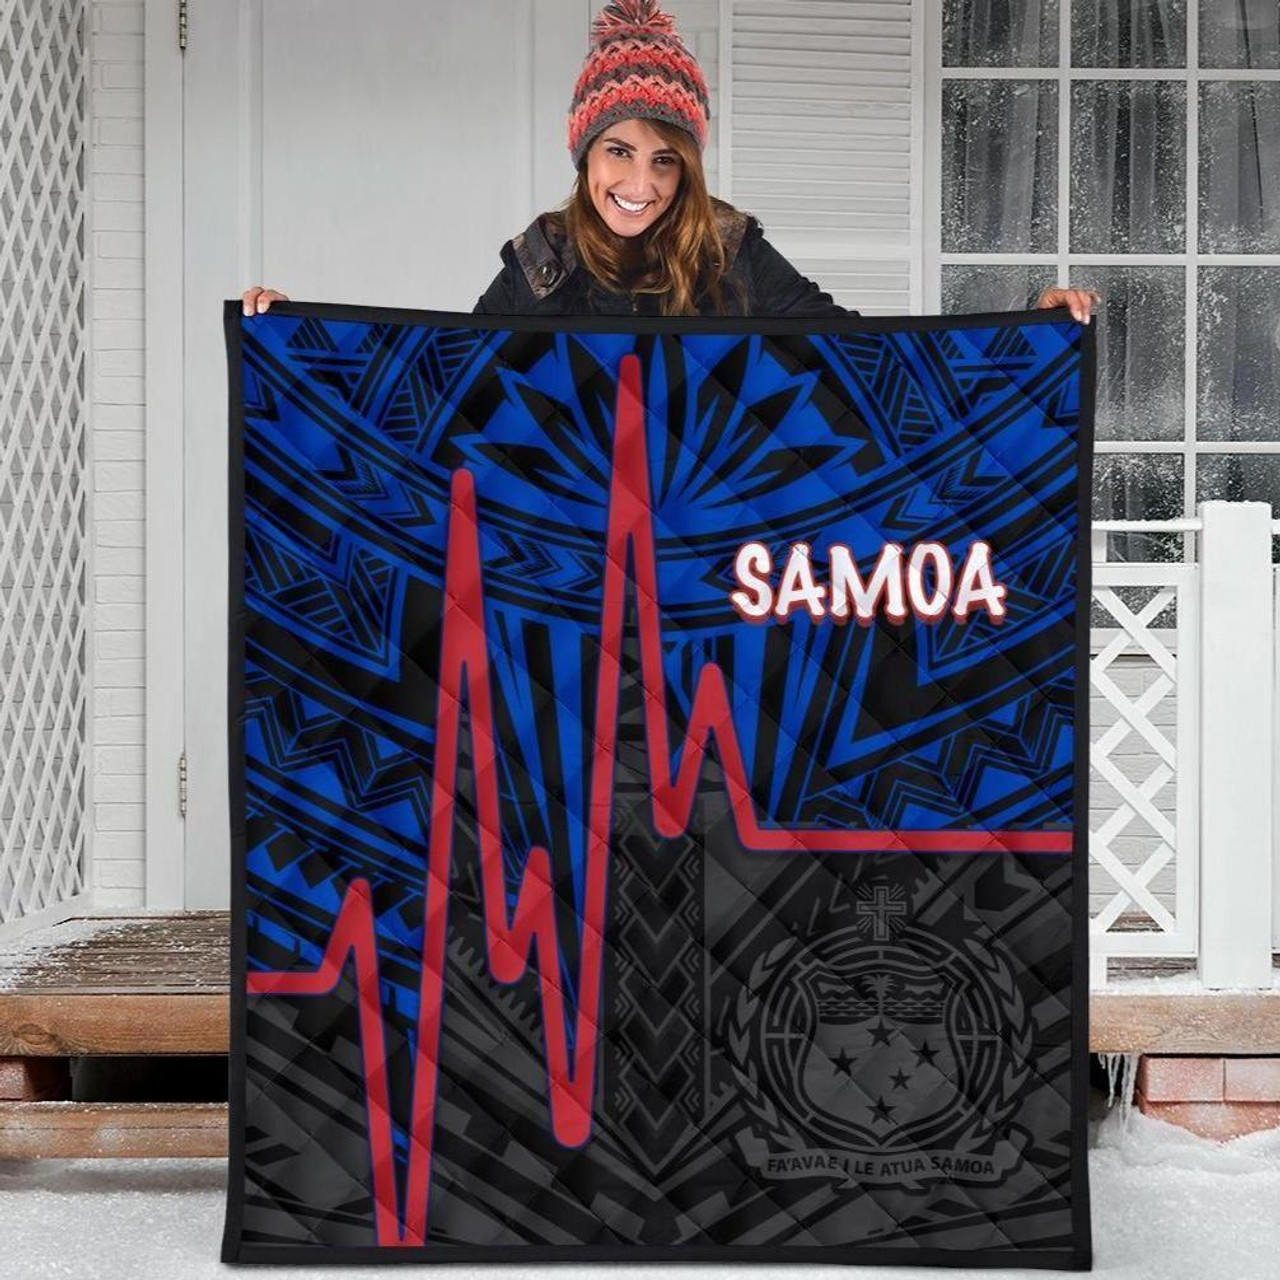 Samoa Premium Quilt - Samoa Seal With Polynesian Patterns In Heartbeat Style(Blue) 1